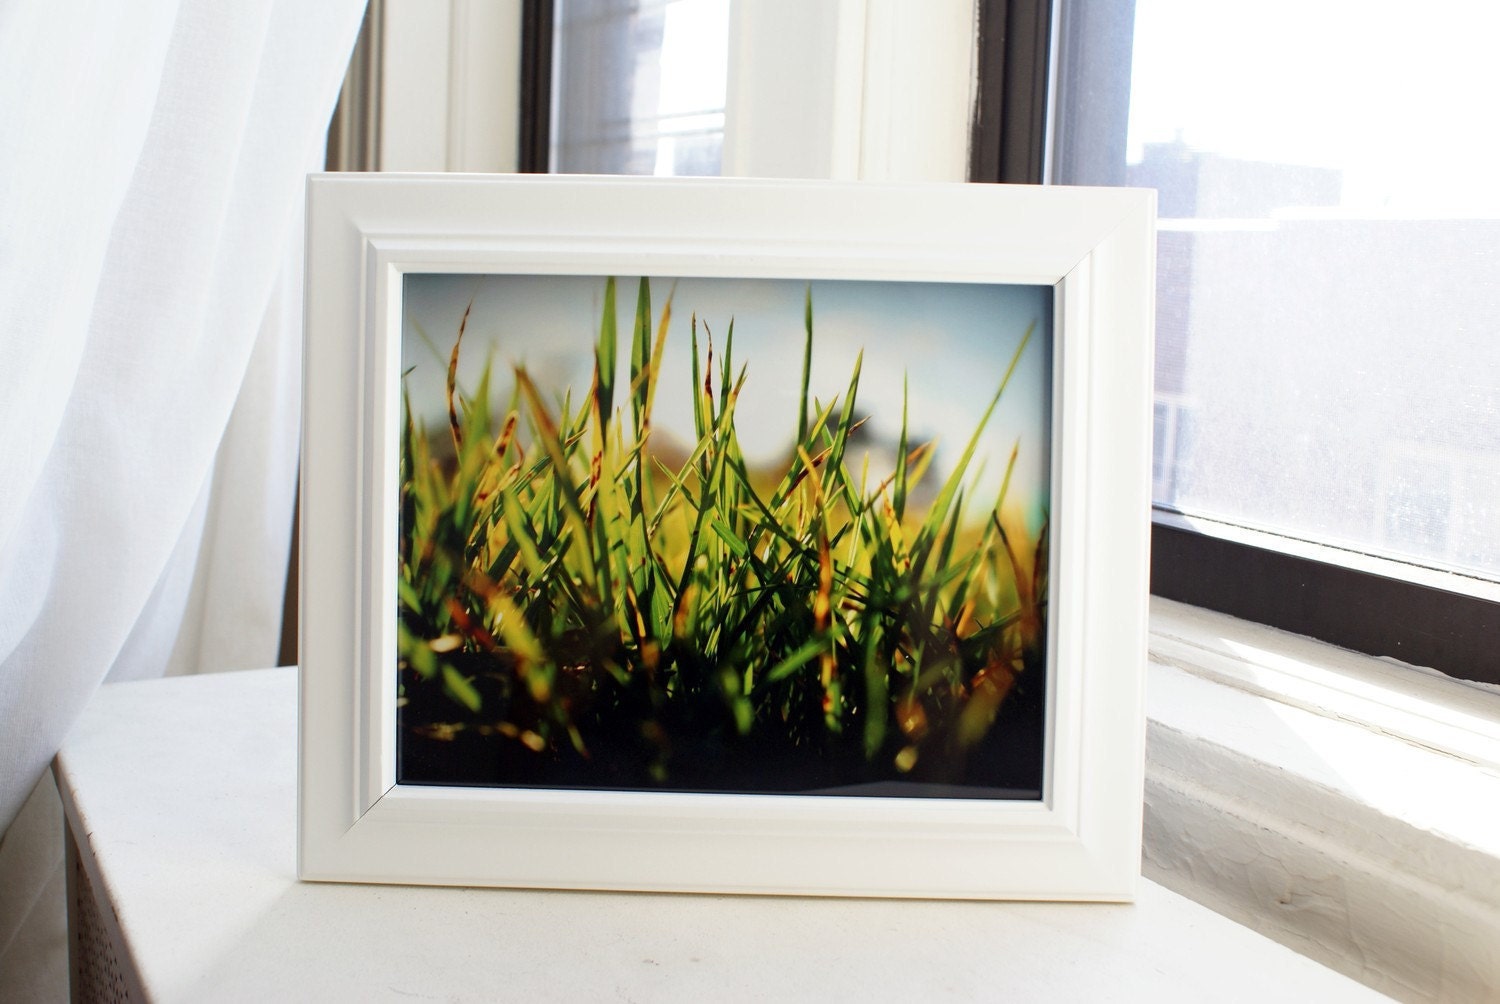 Winter Withered Grass 8x10 Photography Print, Nature Photo Wall Decor - thebqe